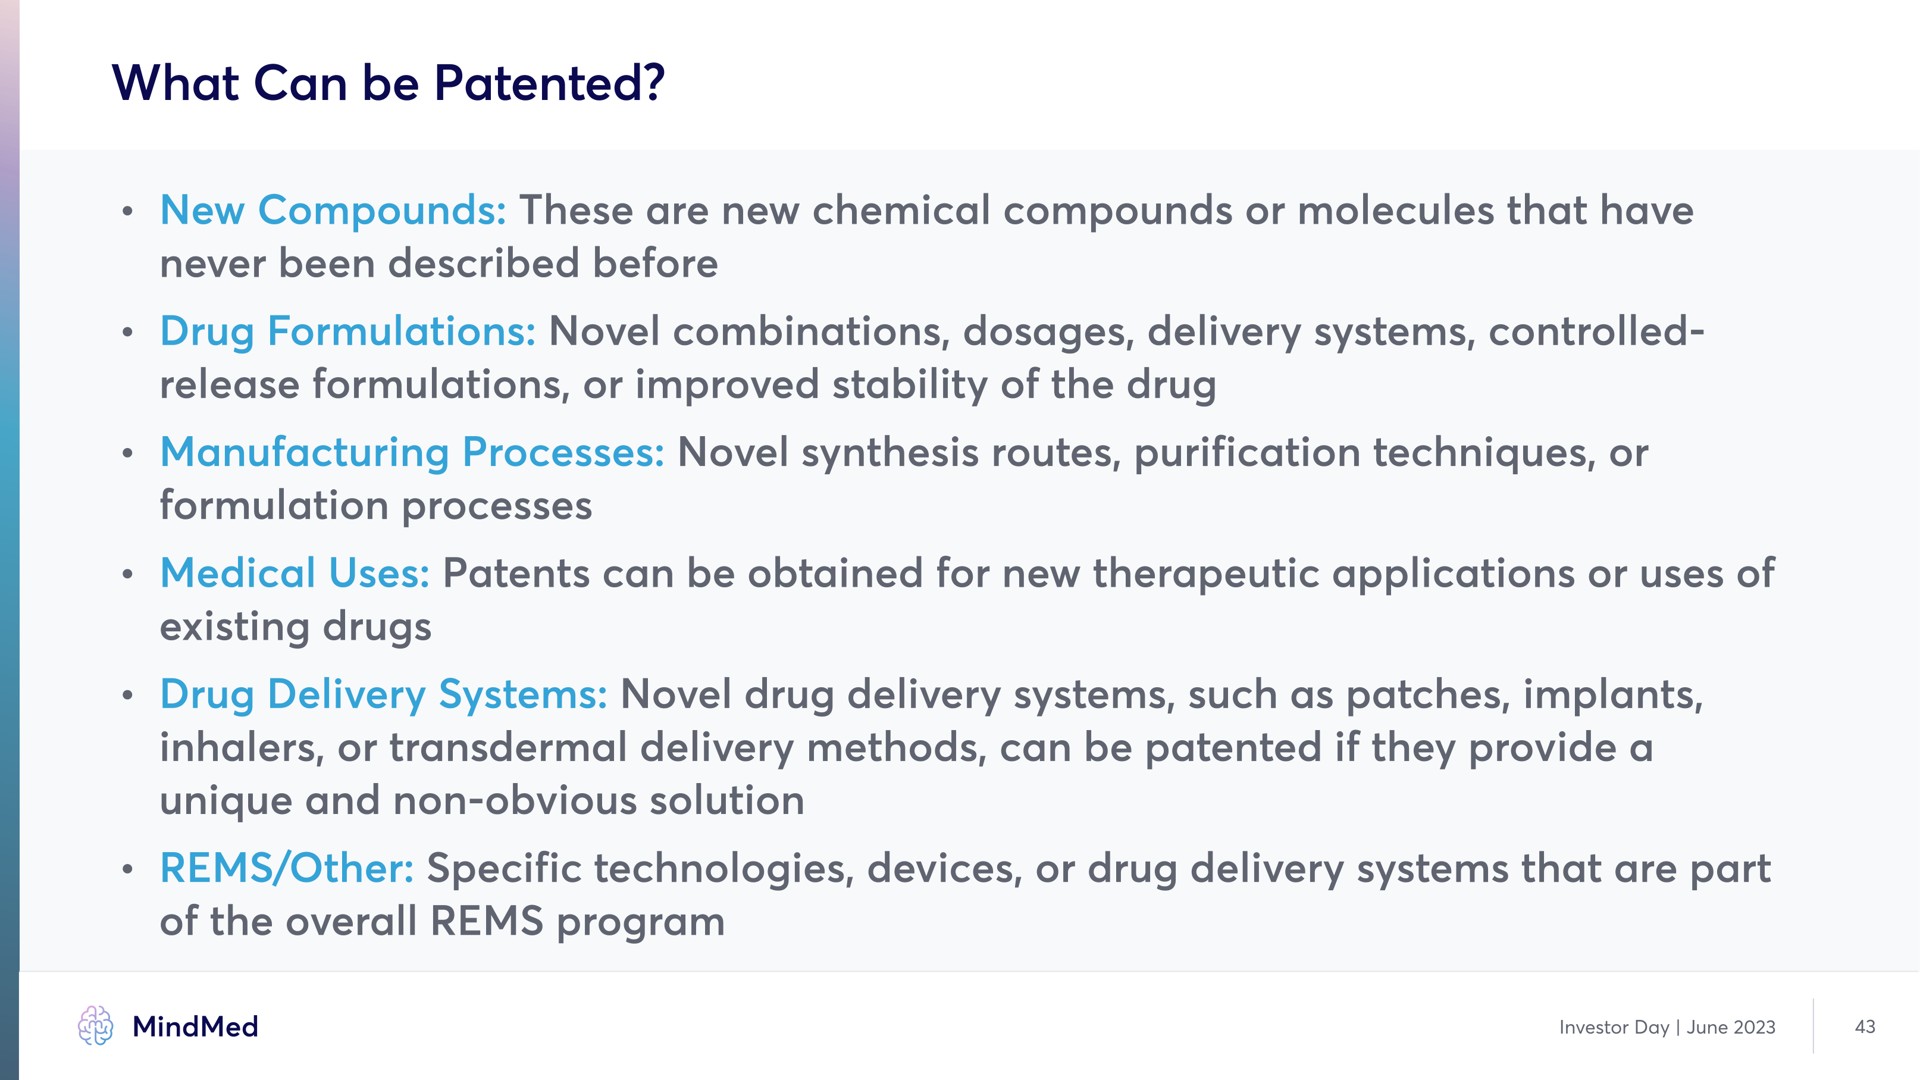 what can be patented | MindMed